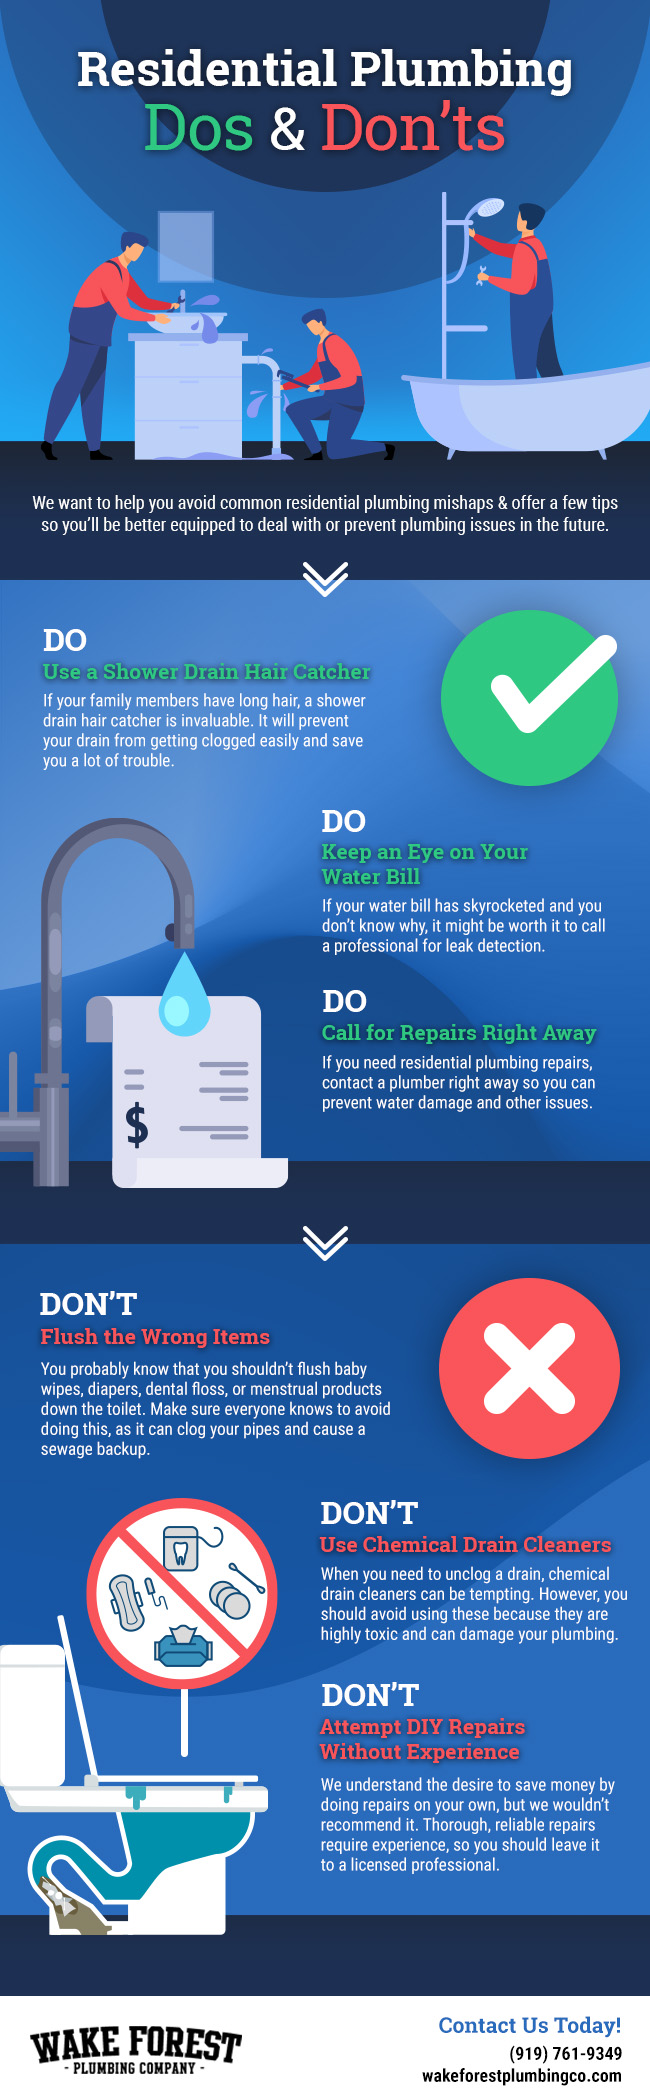 Residential Plumbing Dos and Don’ts